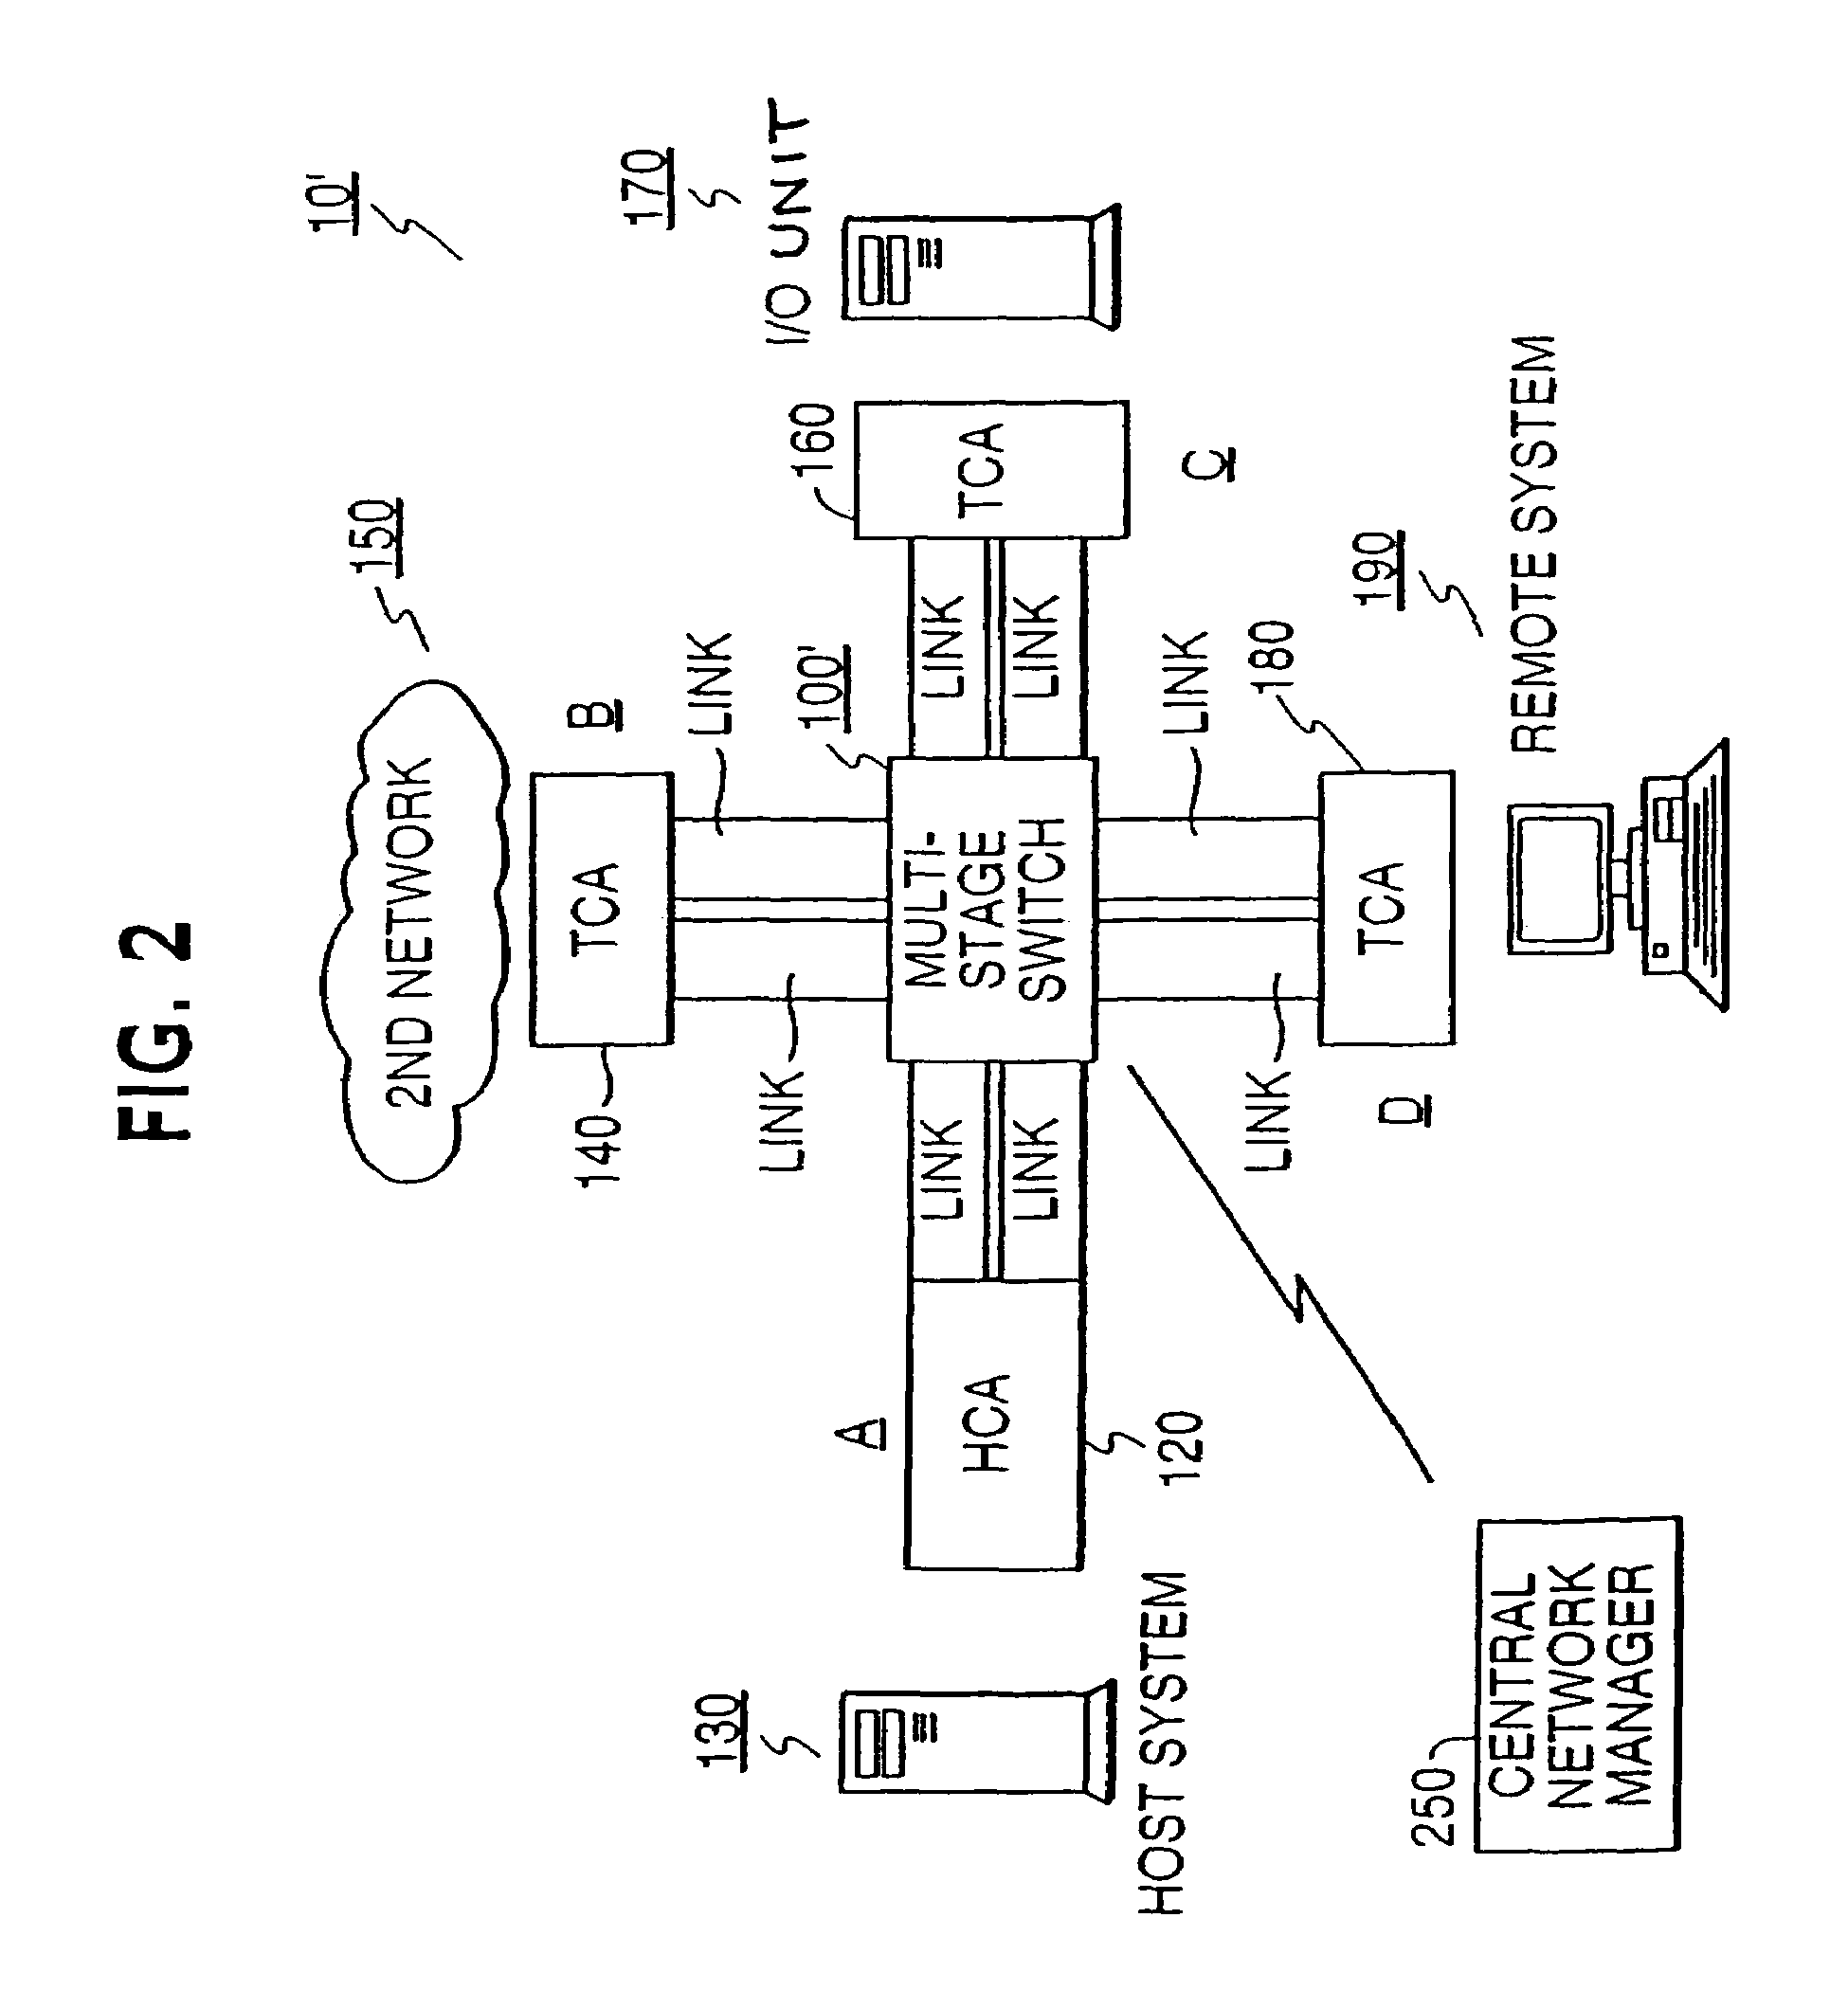 Synchronization mechanism and method for synchronizing multiple threads with a single thread